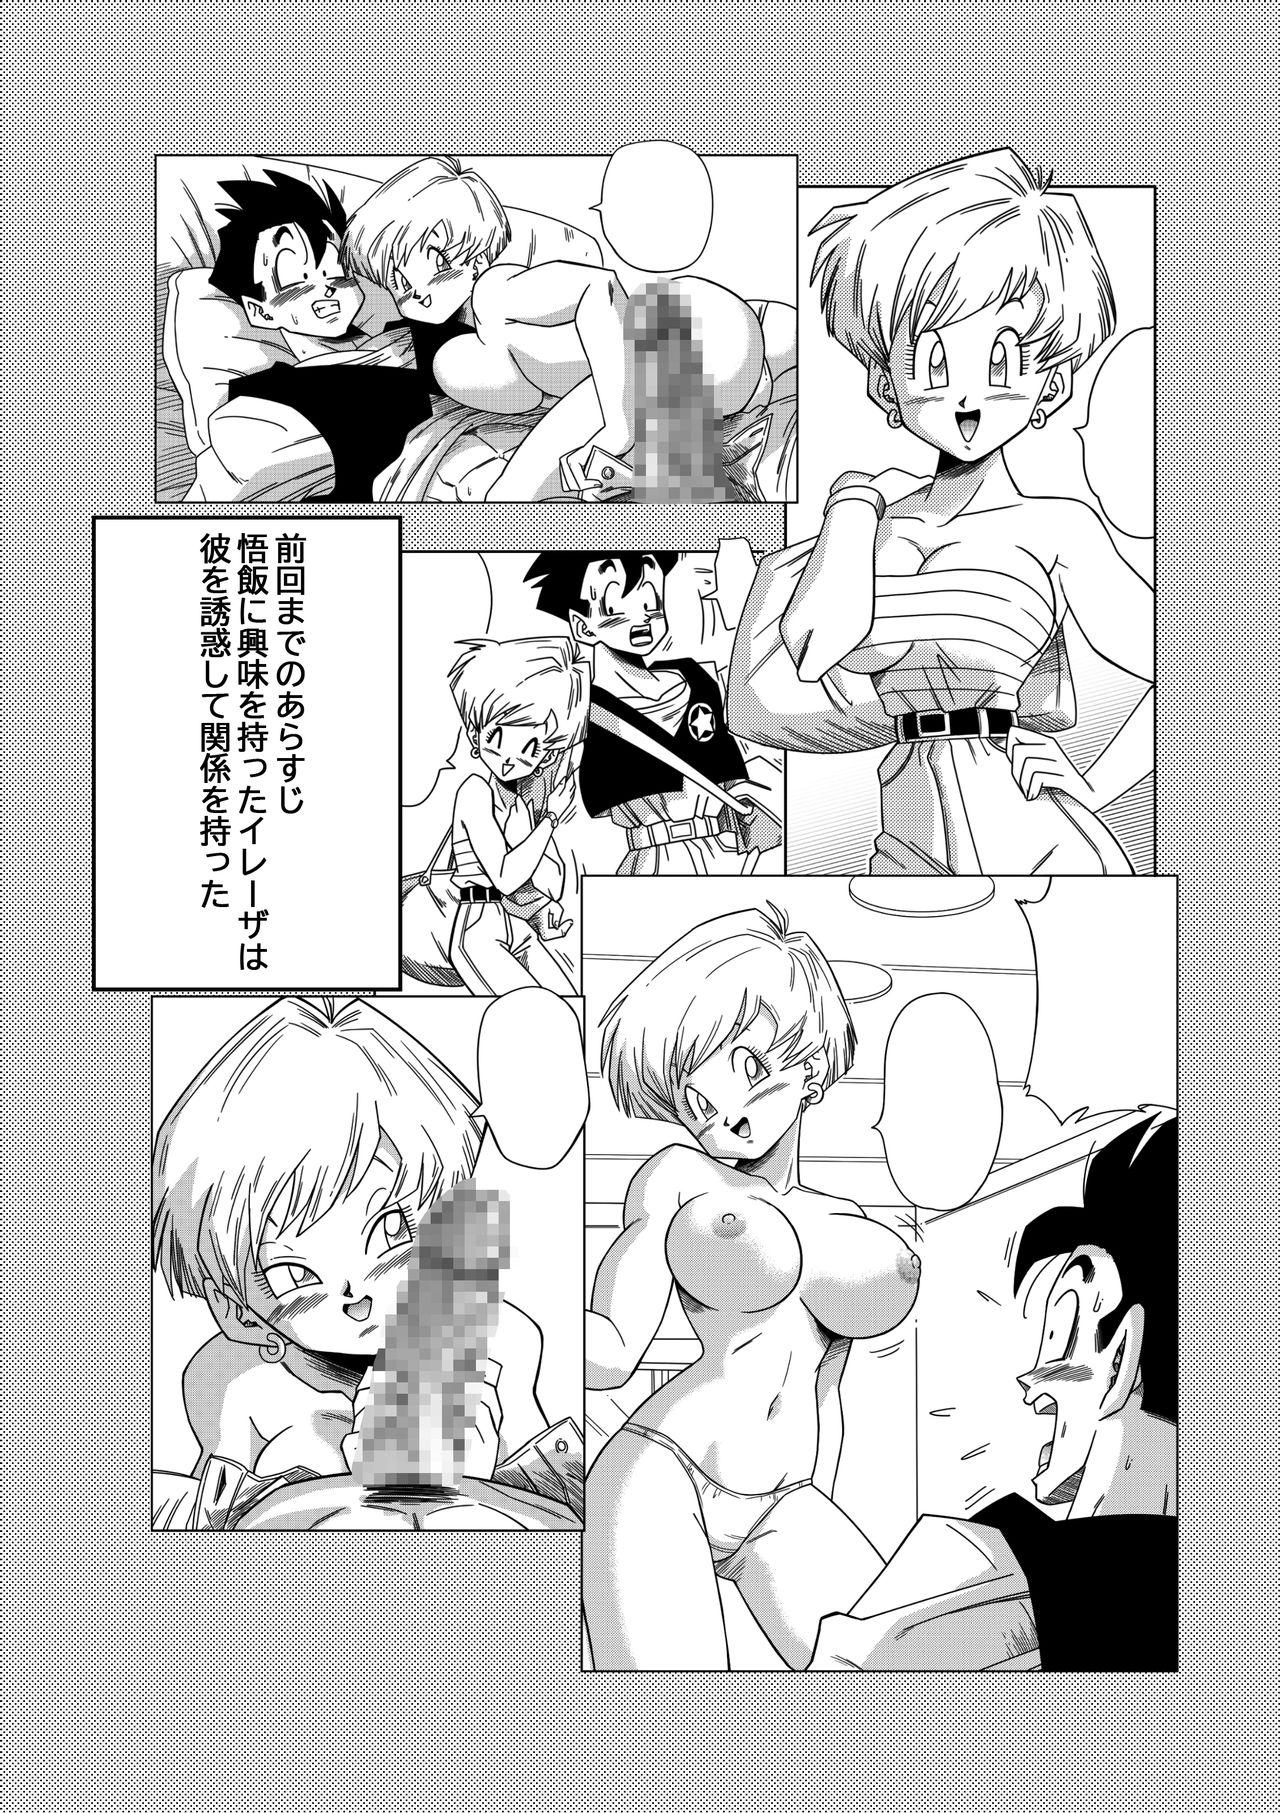 Audition LOVE TRIANGLE Z PART 4 - Dragon ball z Interracial - Page 2